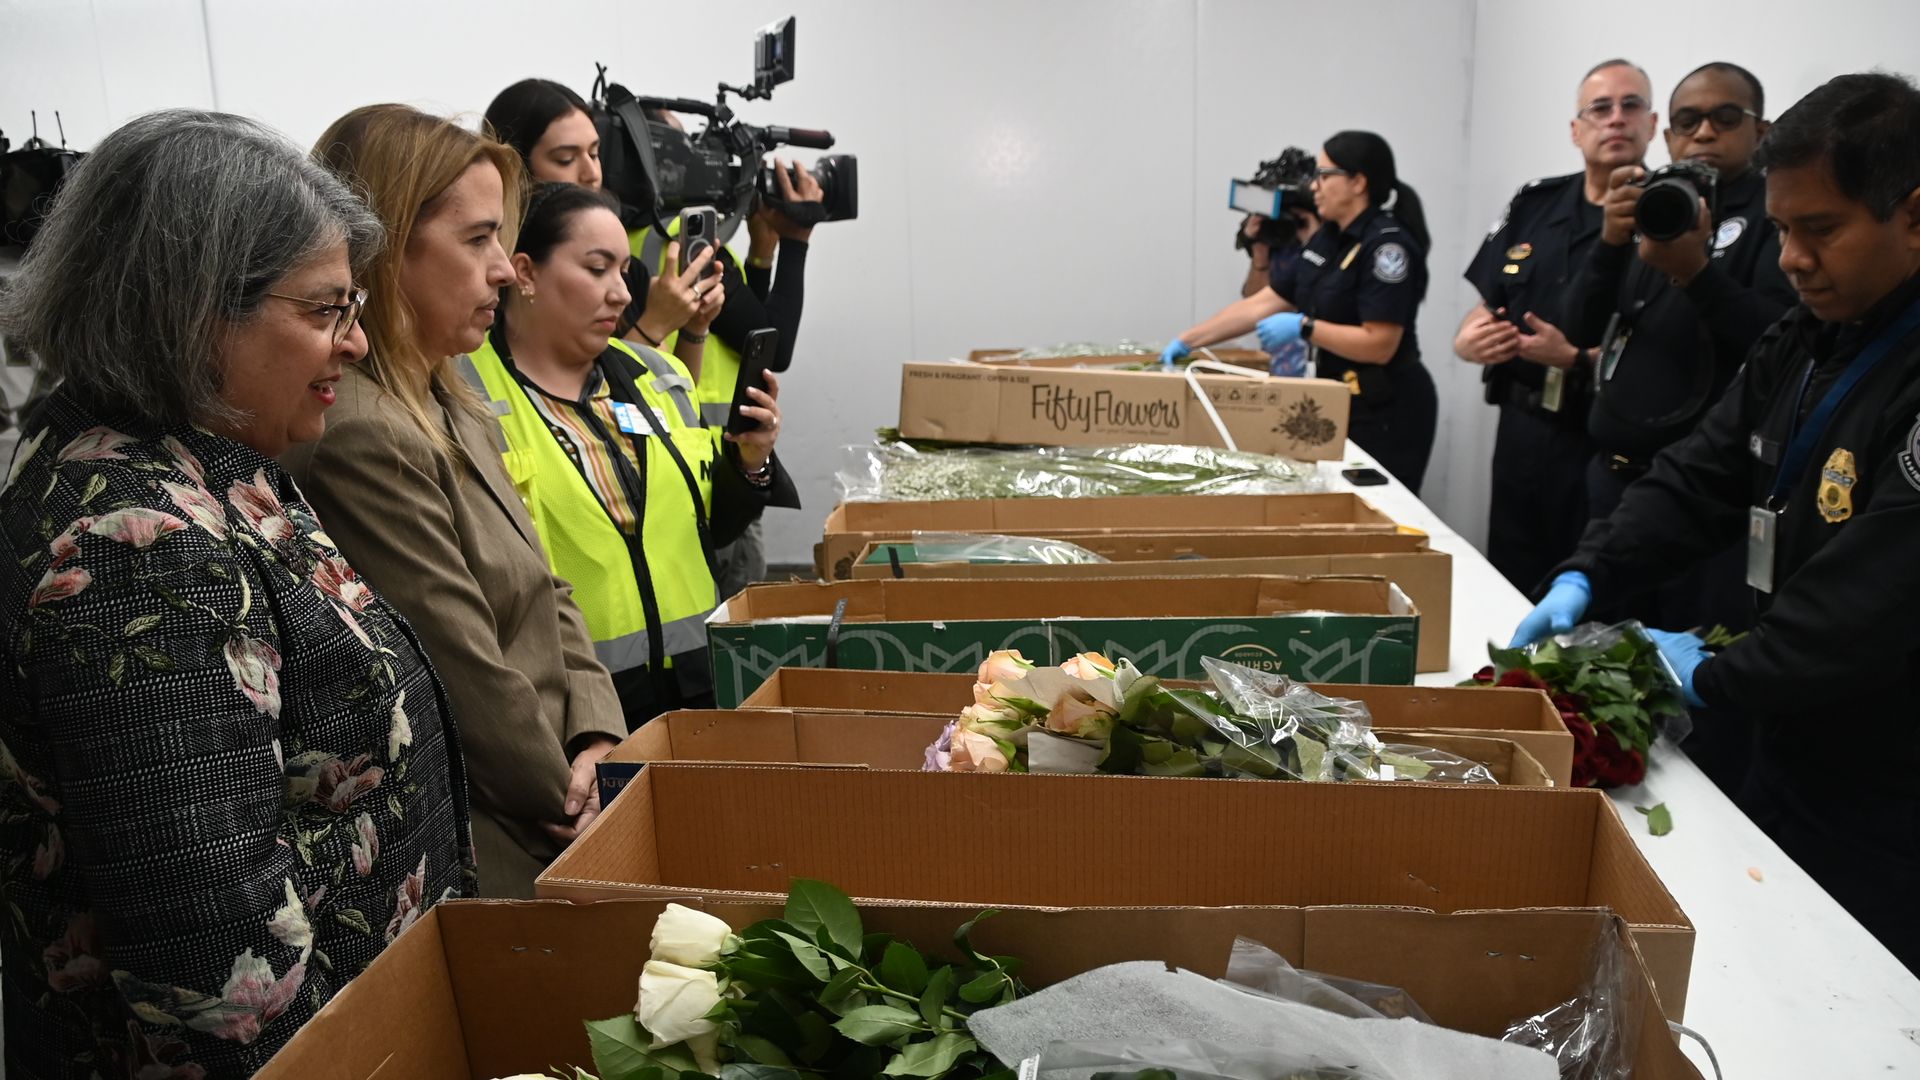 Miami-Dade Mayor Daniella Levine Cava watches how airport workers inspect imported flowers delivered ahead of Mother's Day.